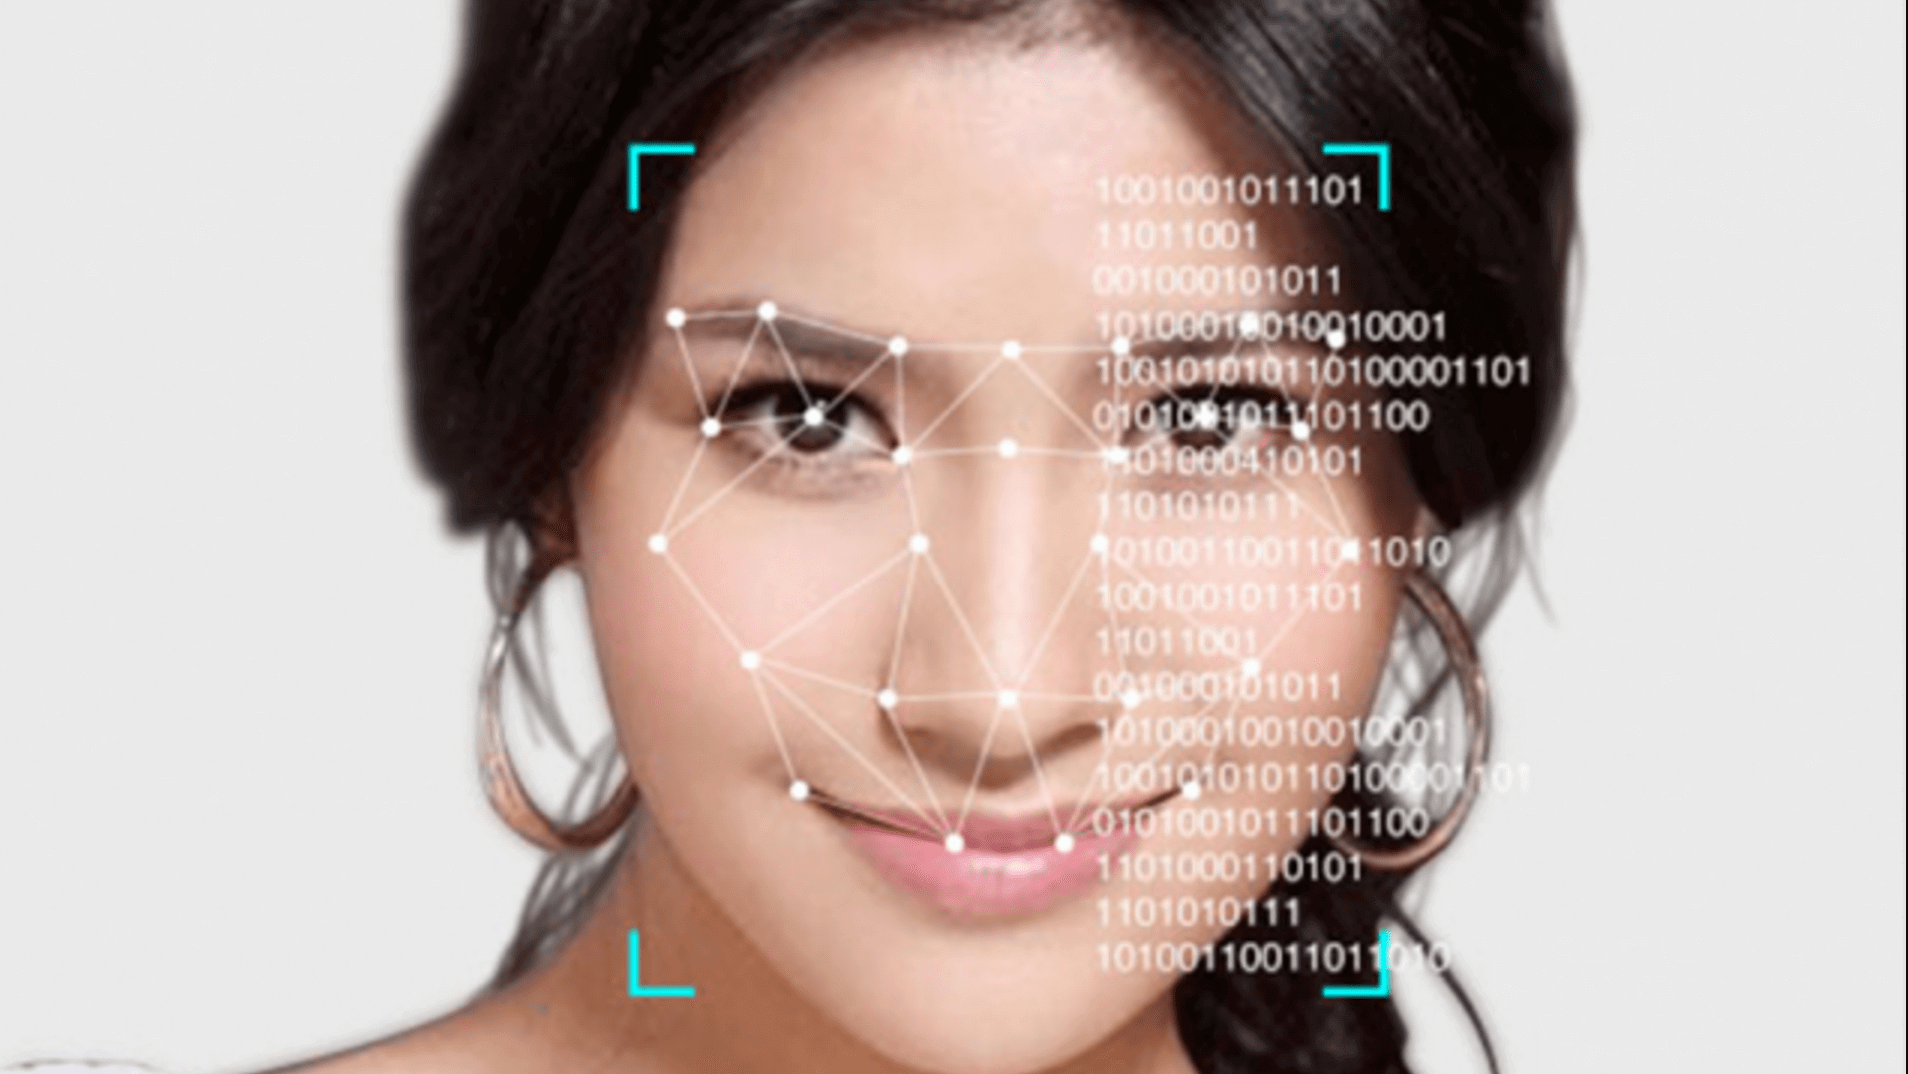 Facial Recognition Software For Pictures